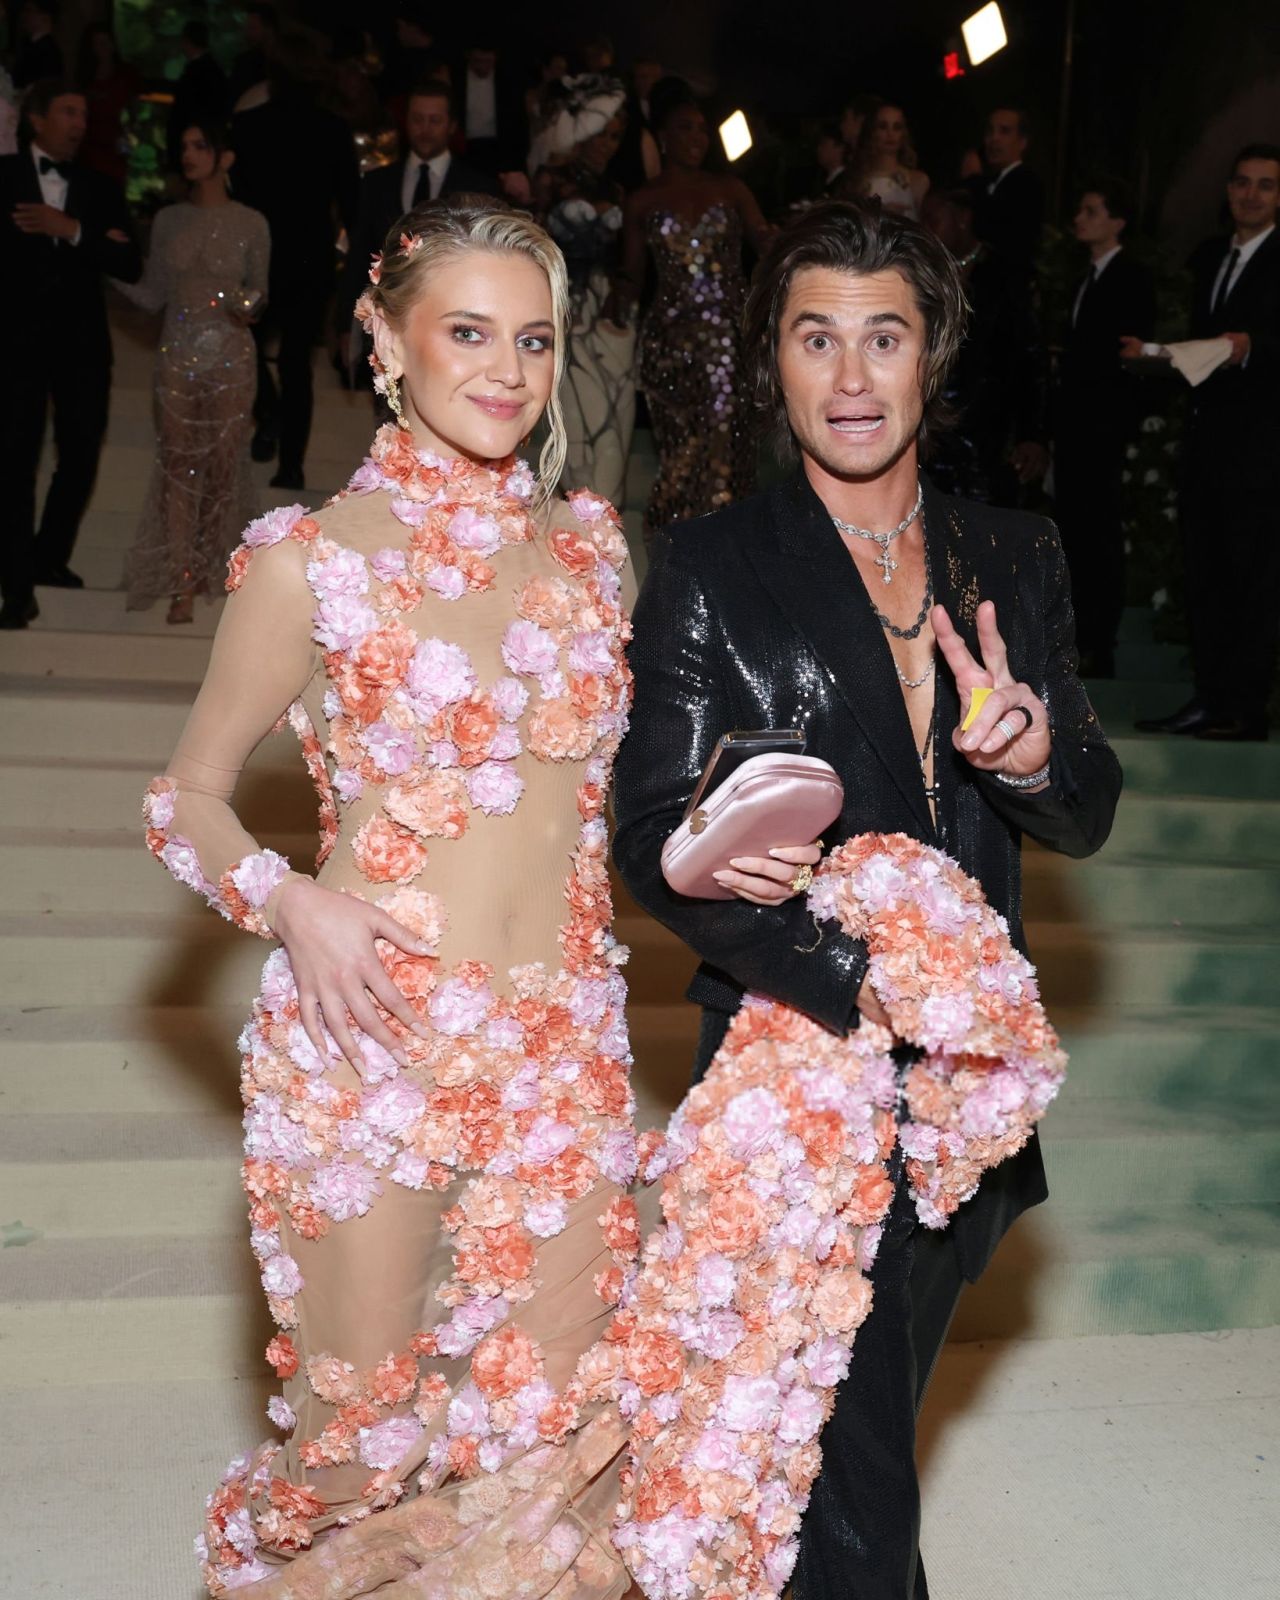 KELSEA BALLERINI AND CHASE STOKES MAKE A STUNNING DEBUT AT THE 2024 MET GALA IN NEW YORK08